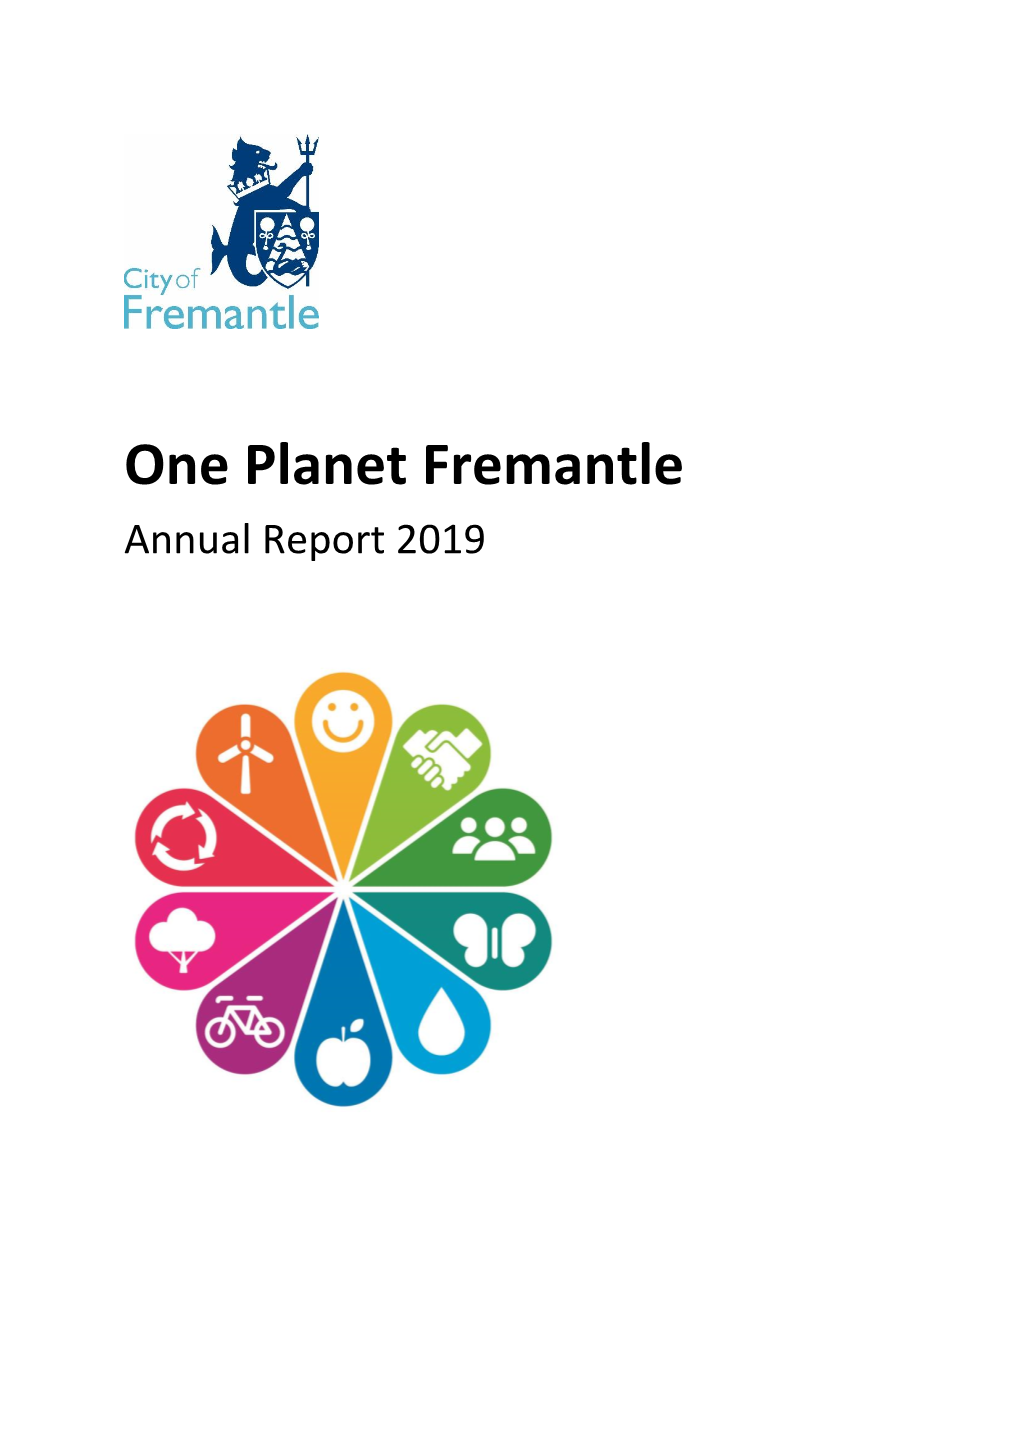 One Planet Fremantle Annual Report 2019